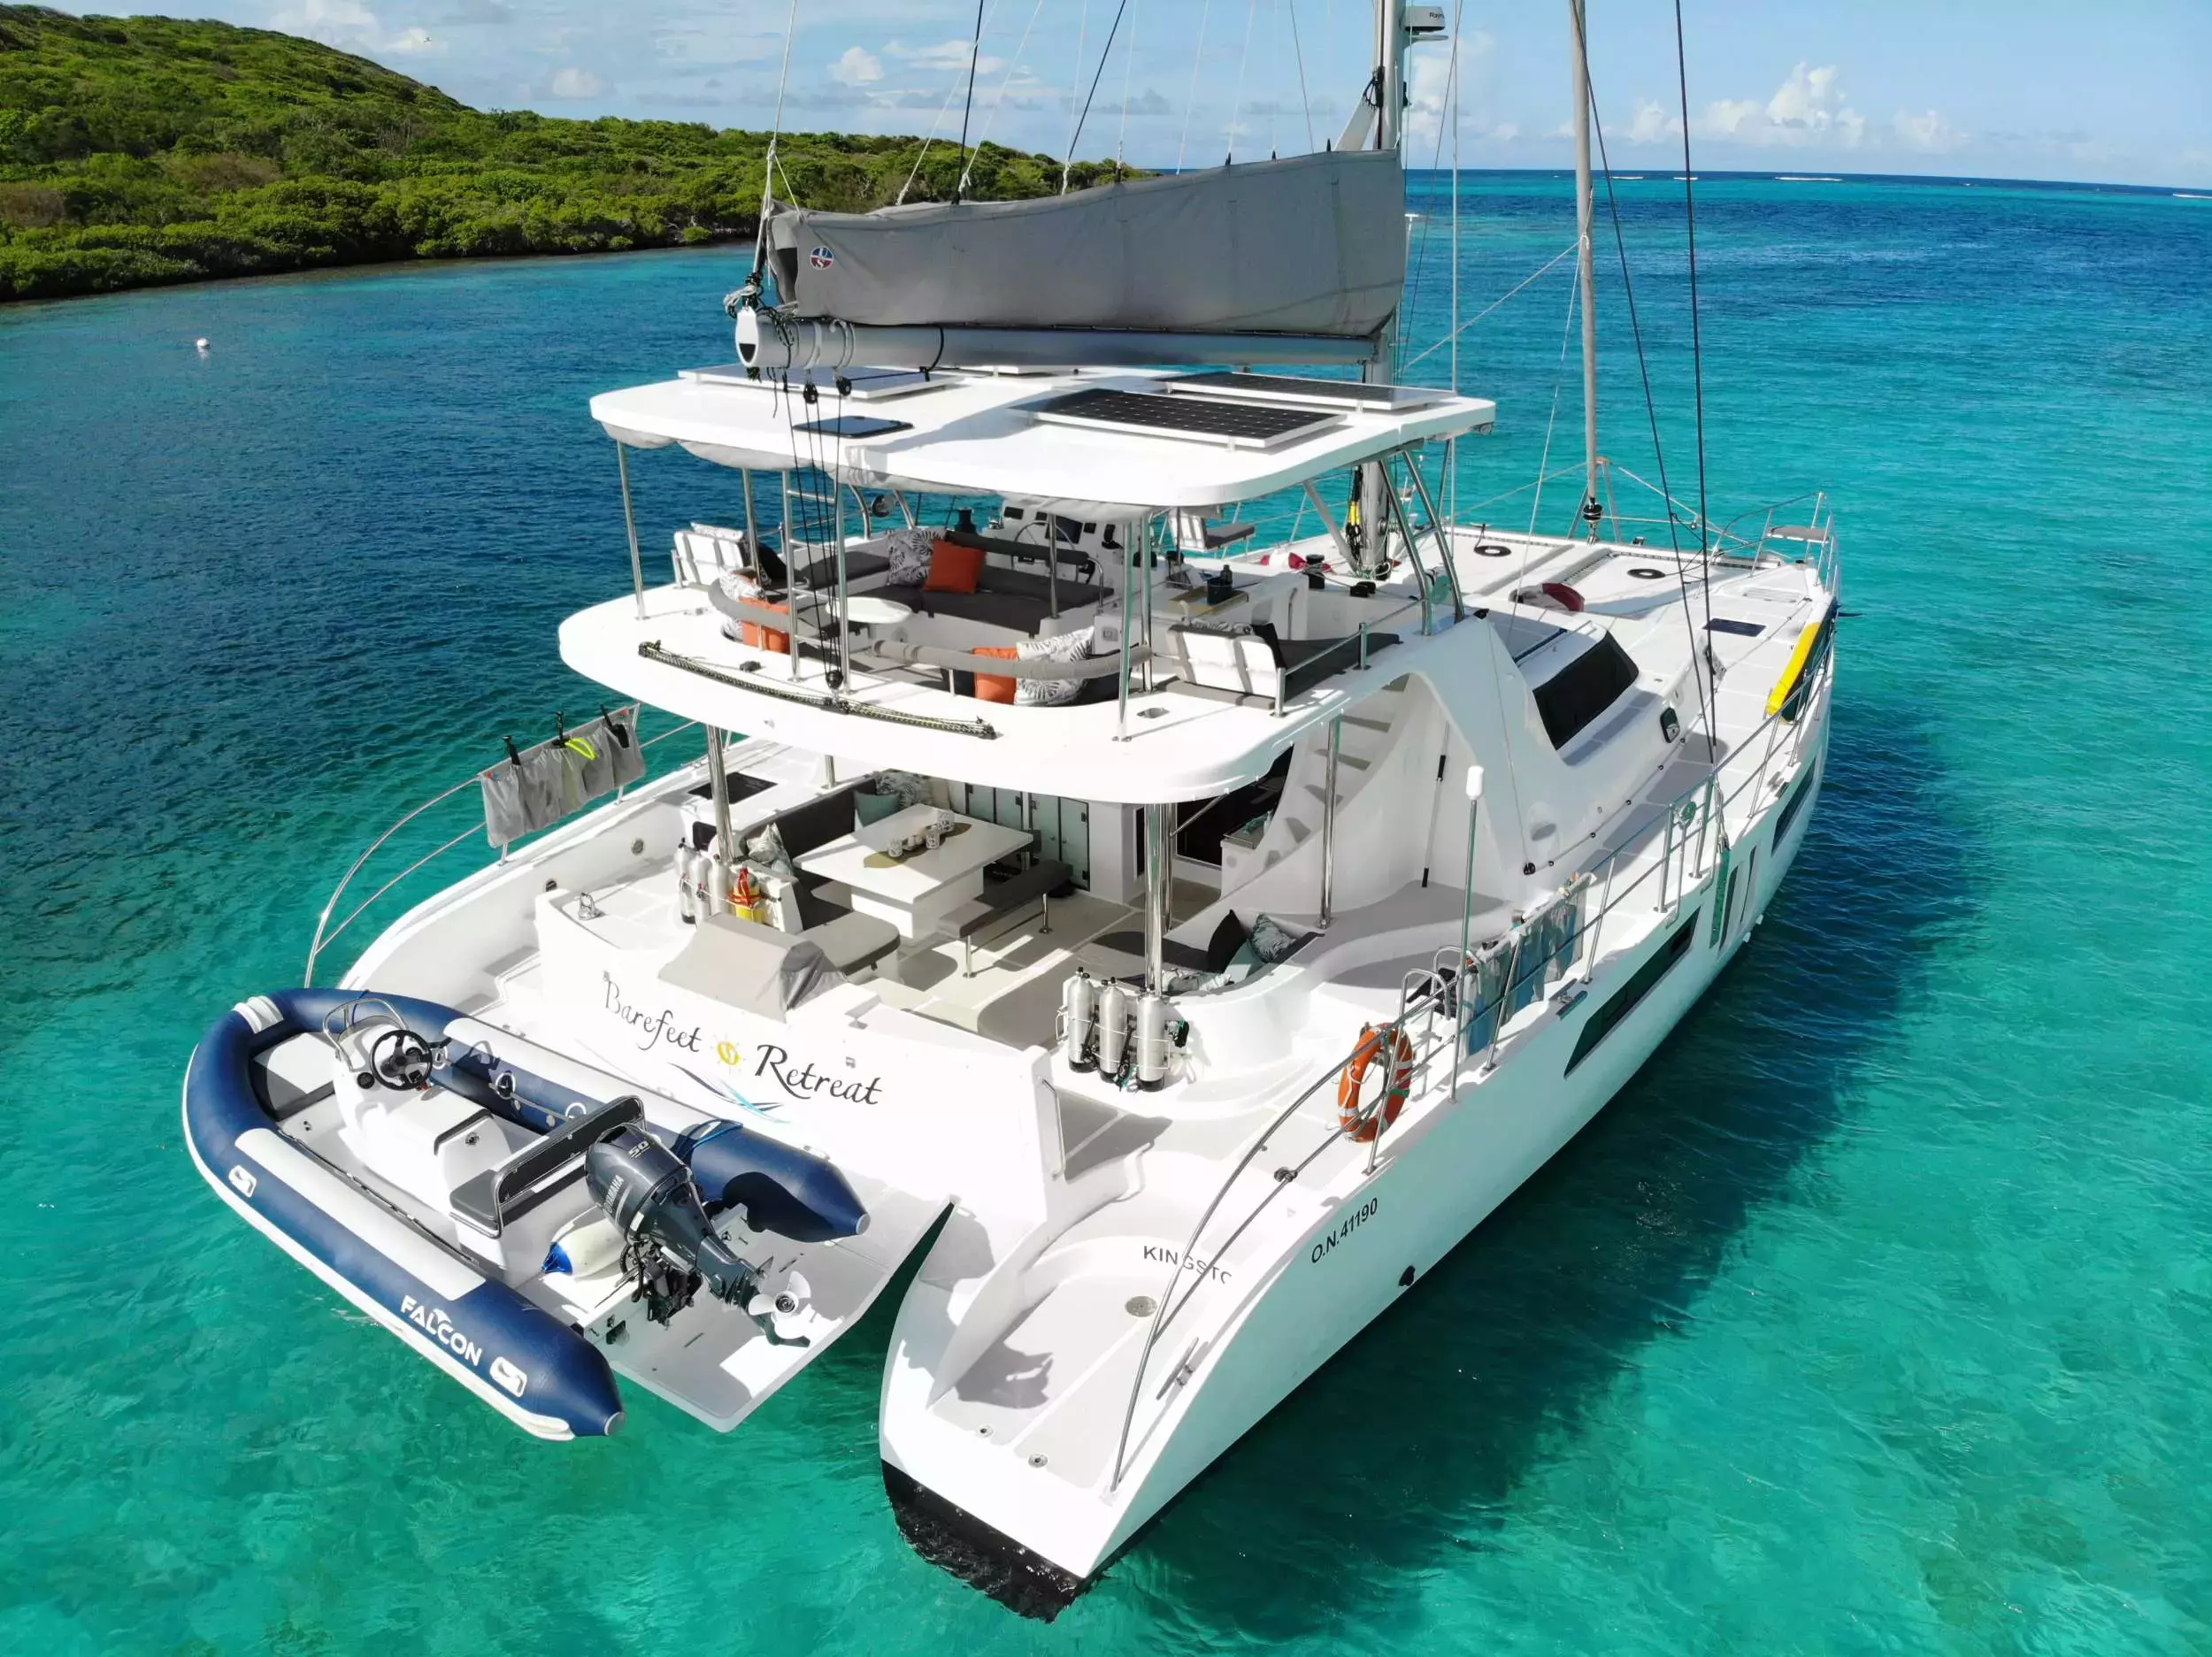 Barefeet Retreat by Royal Cape - Special Offer for a private Sailing Catamaran Charter in St Thomas with a crew